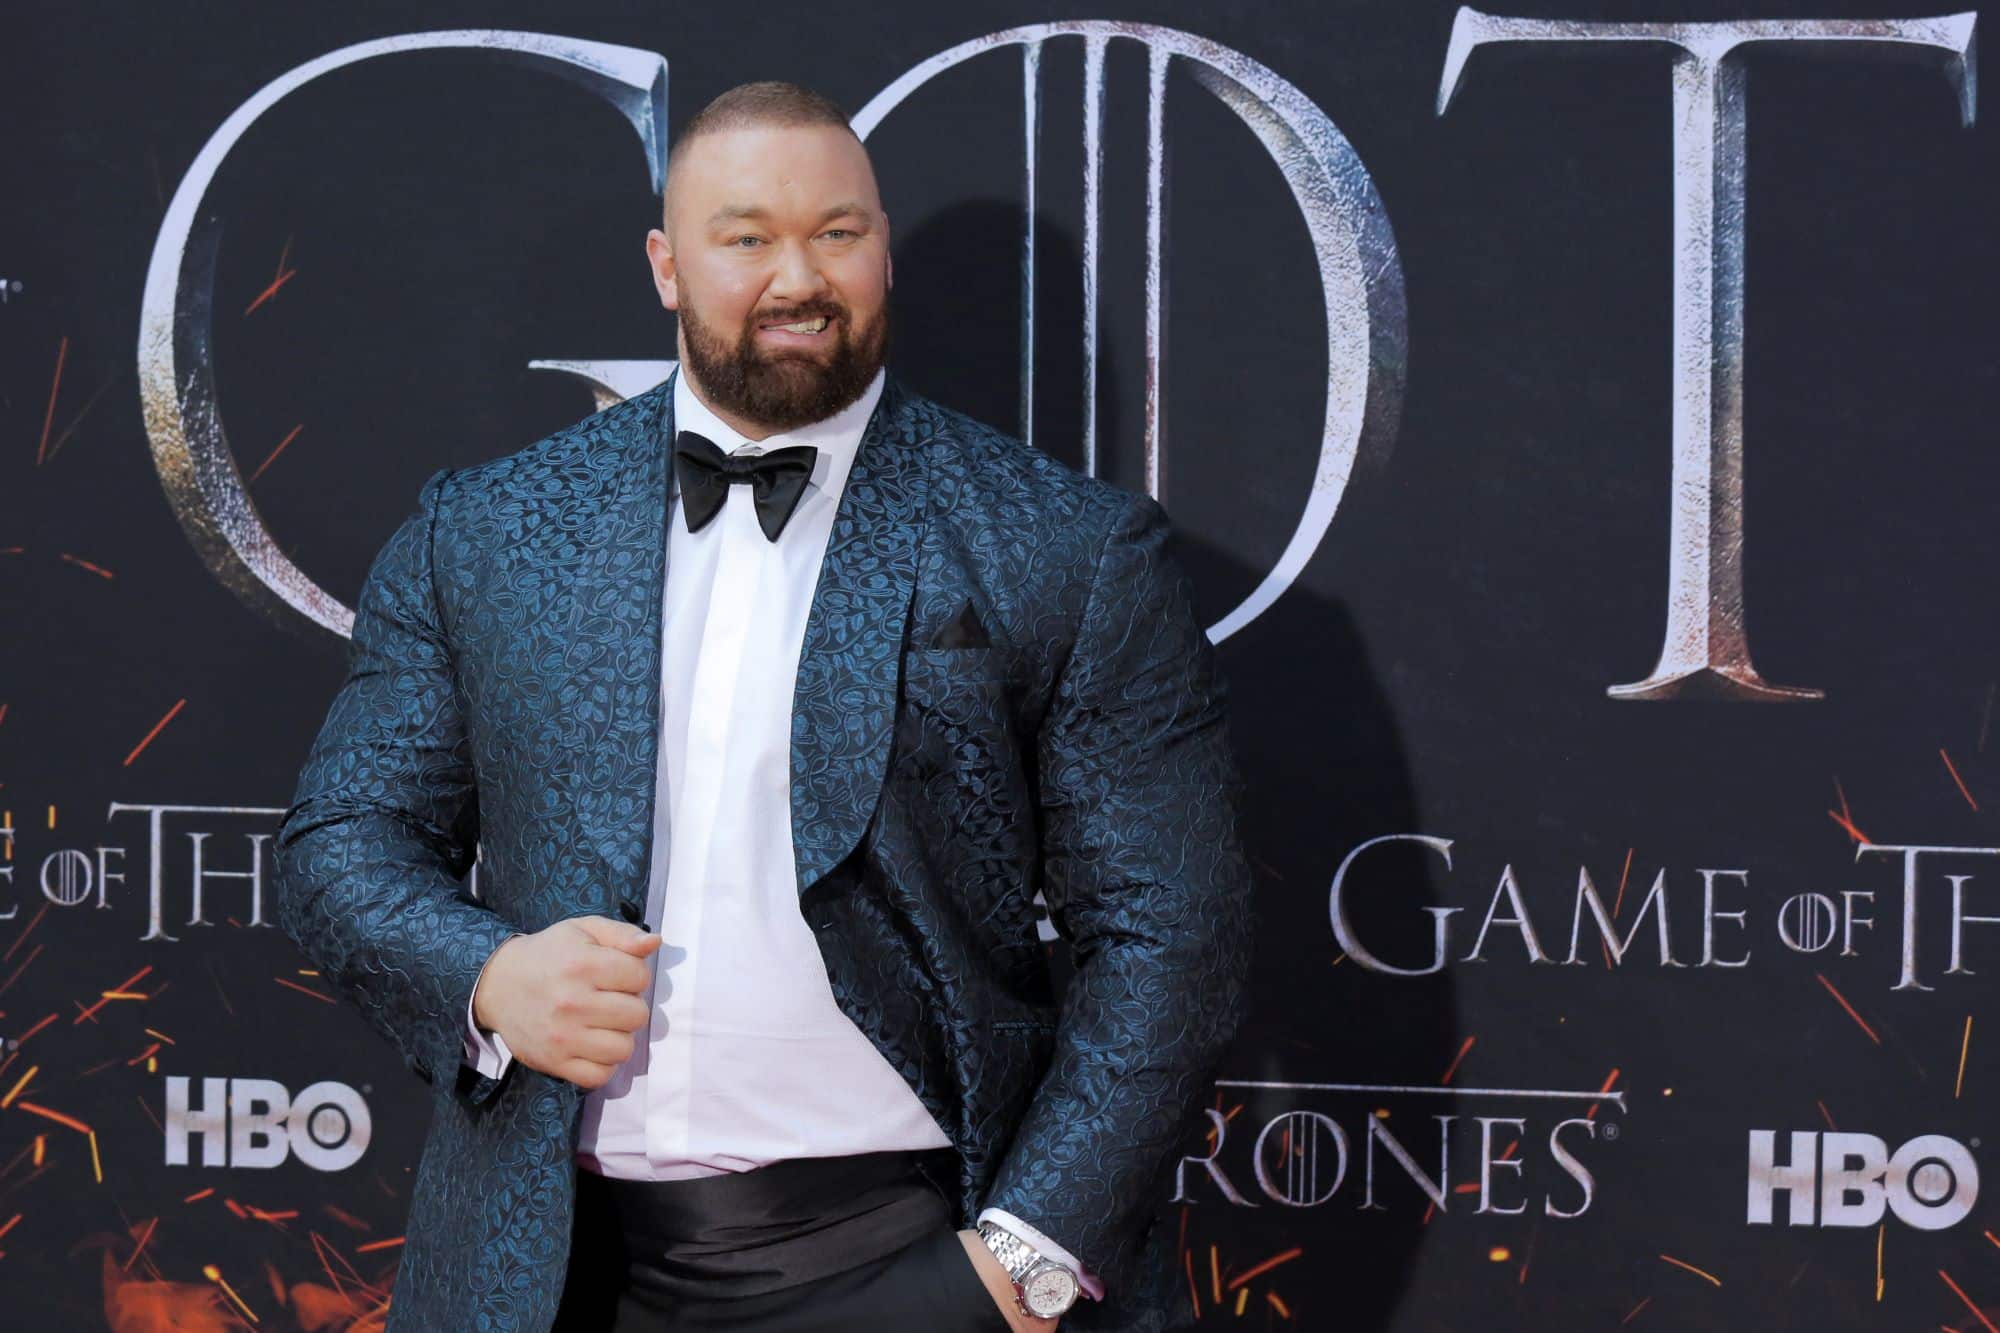 Game of Thrones’ Hora rep and colleagues mourn loss of premature daughter – WN24.cz – World News 24